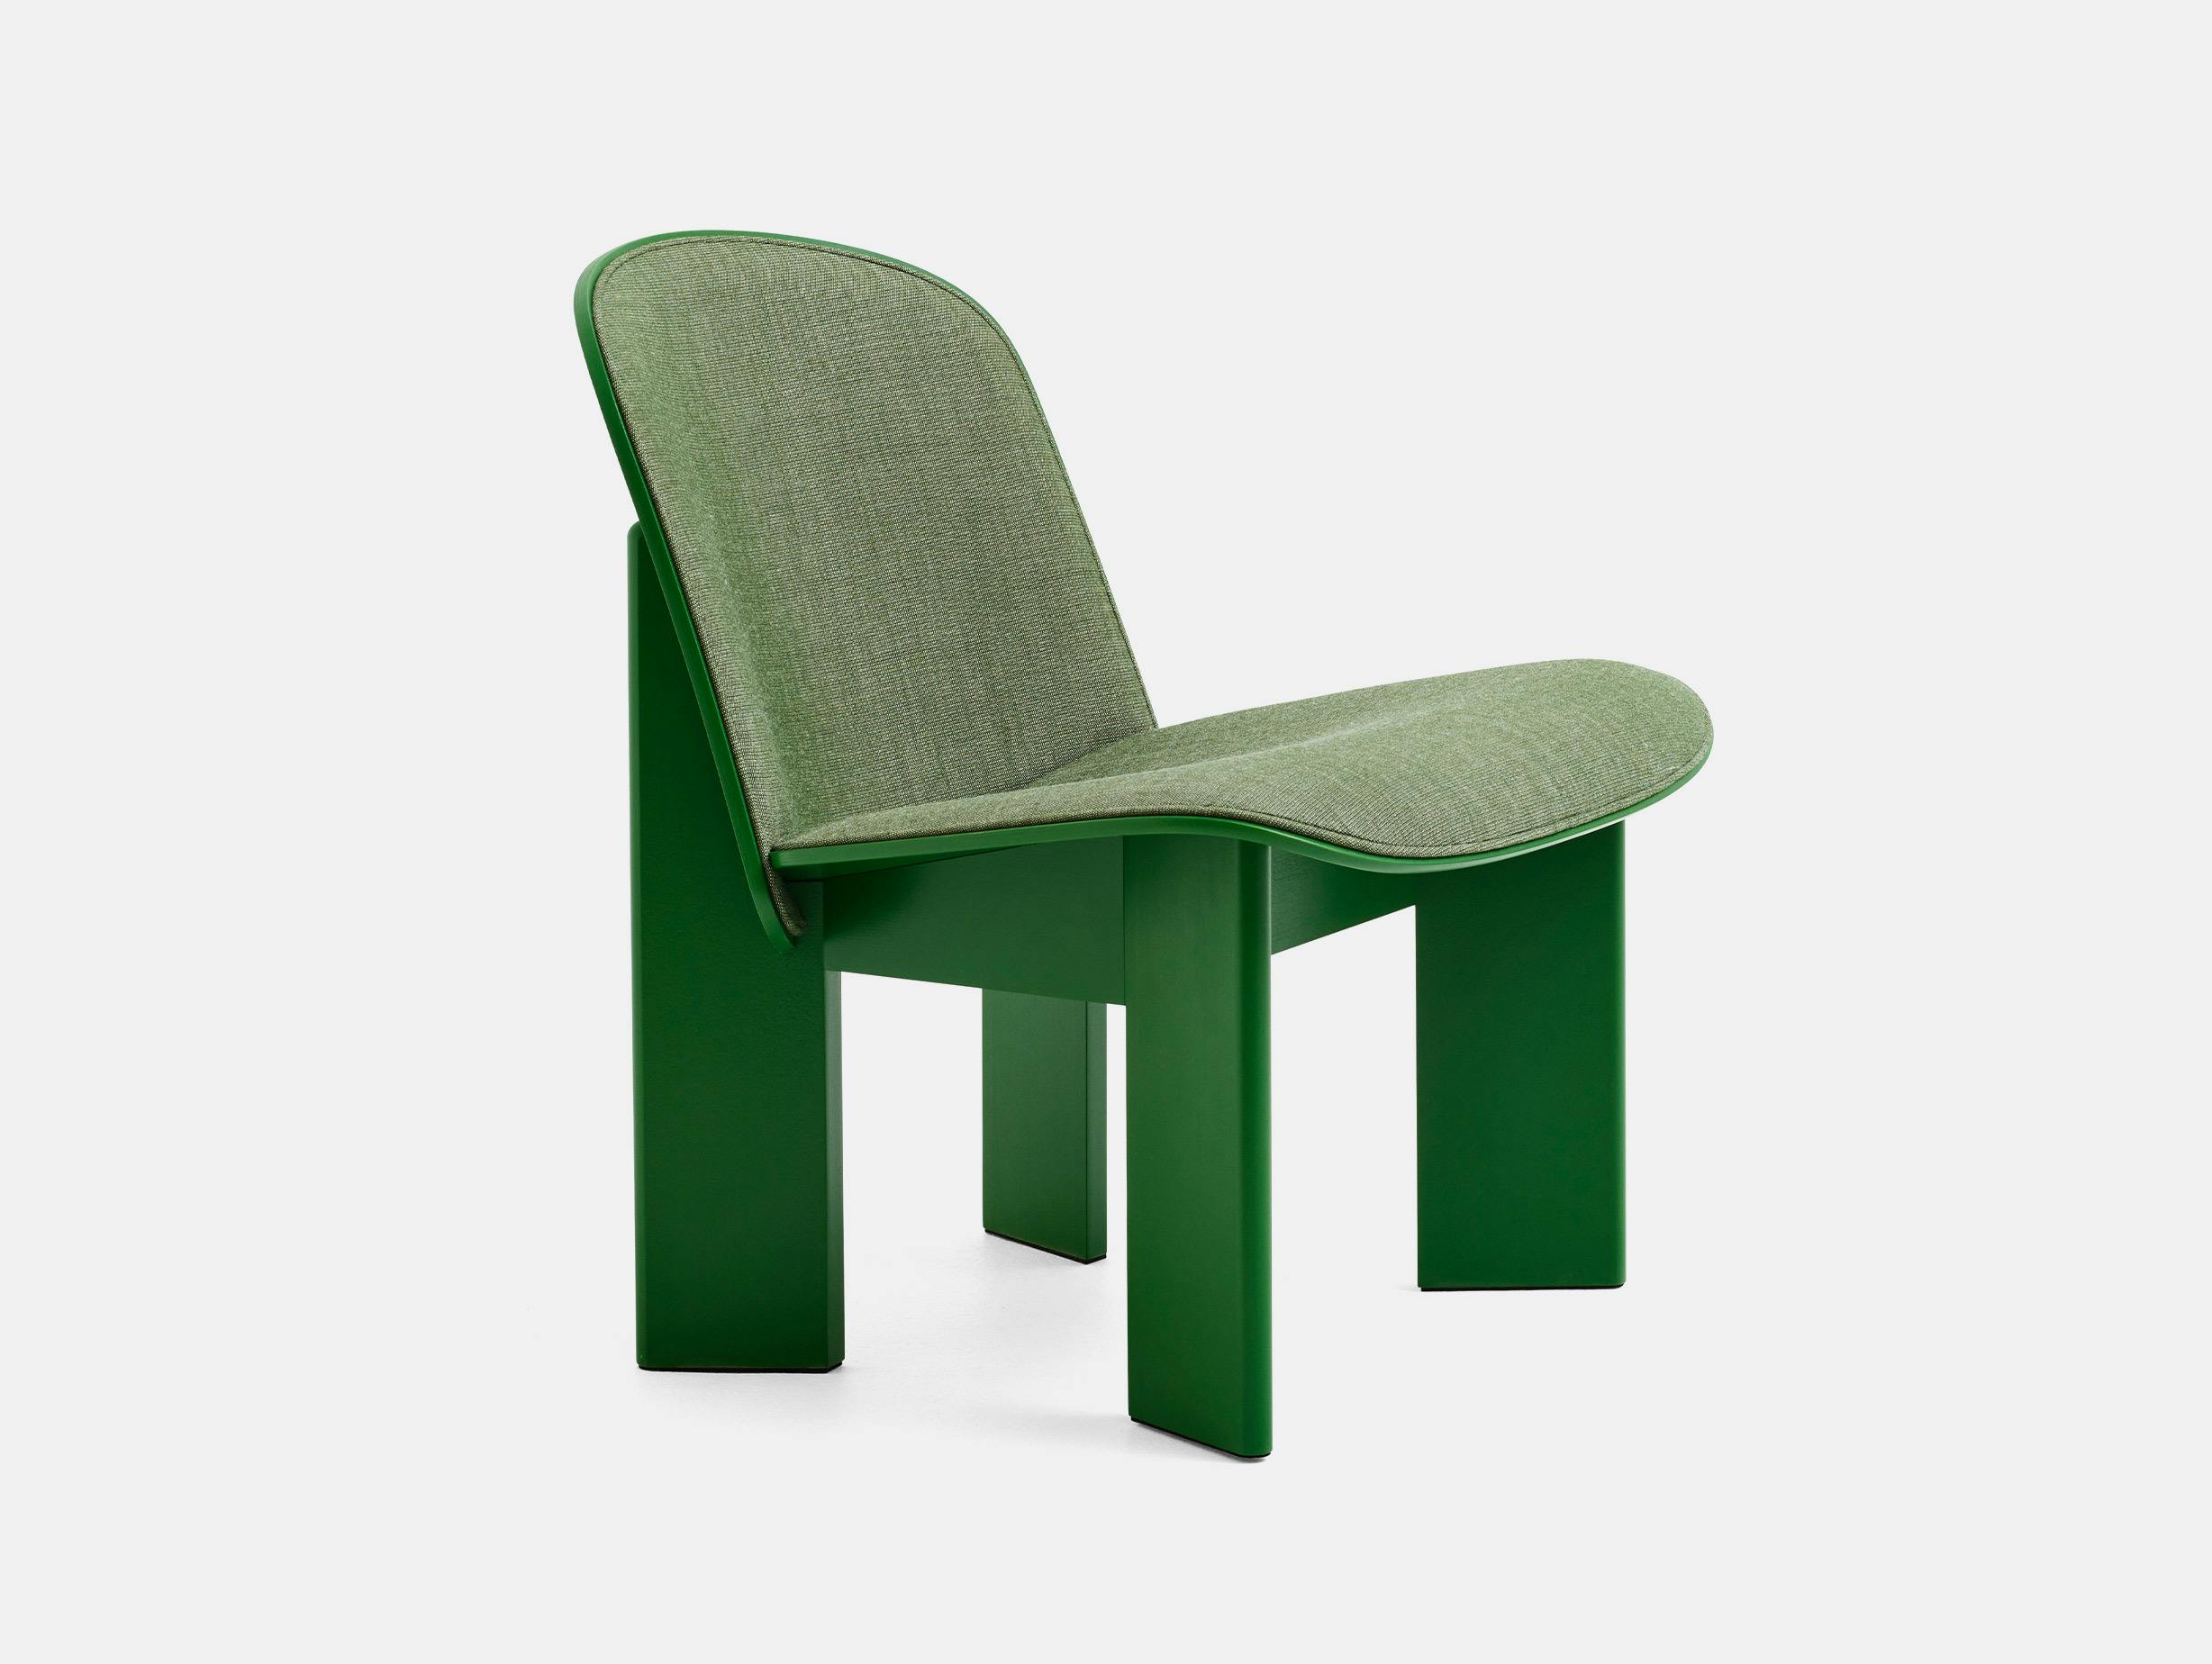 Hay andreas bergsaker chisel lounge chair lush green beech canvas 926